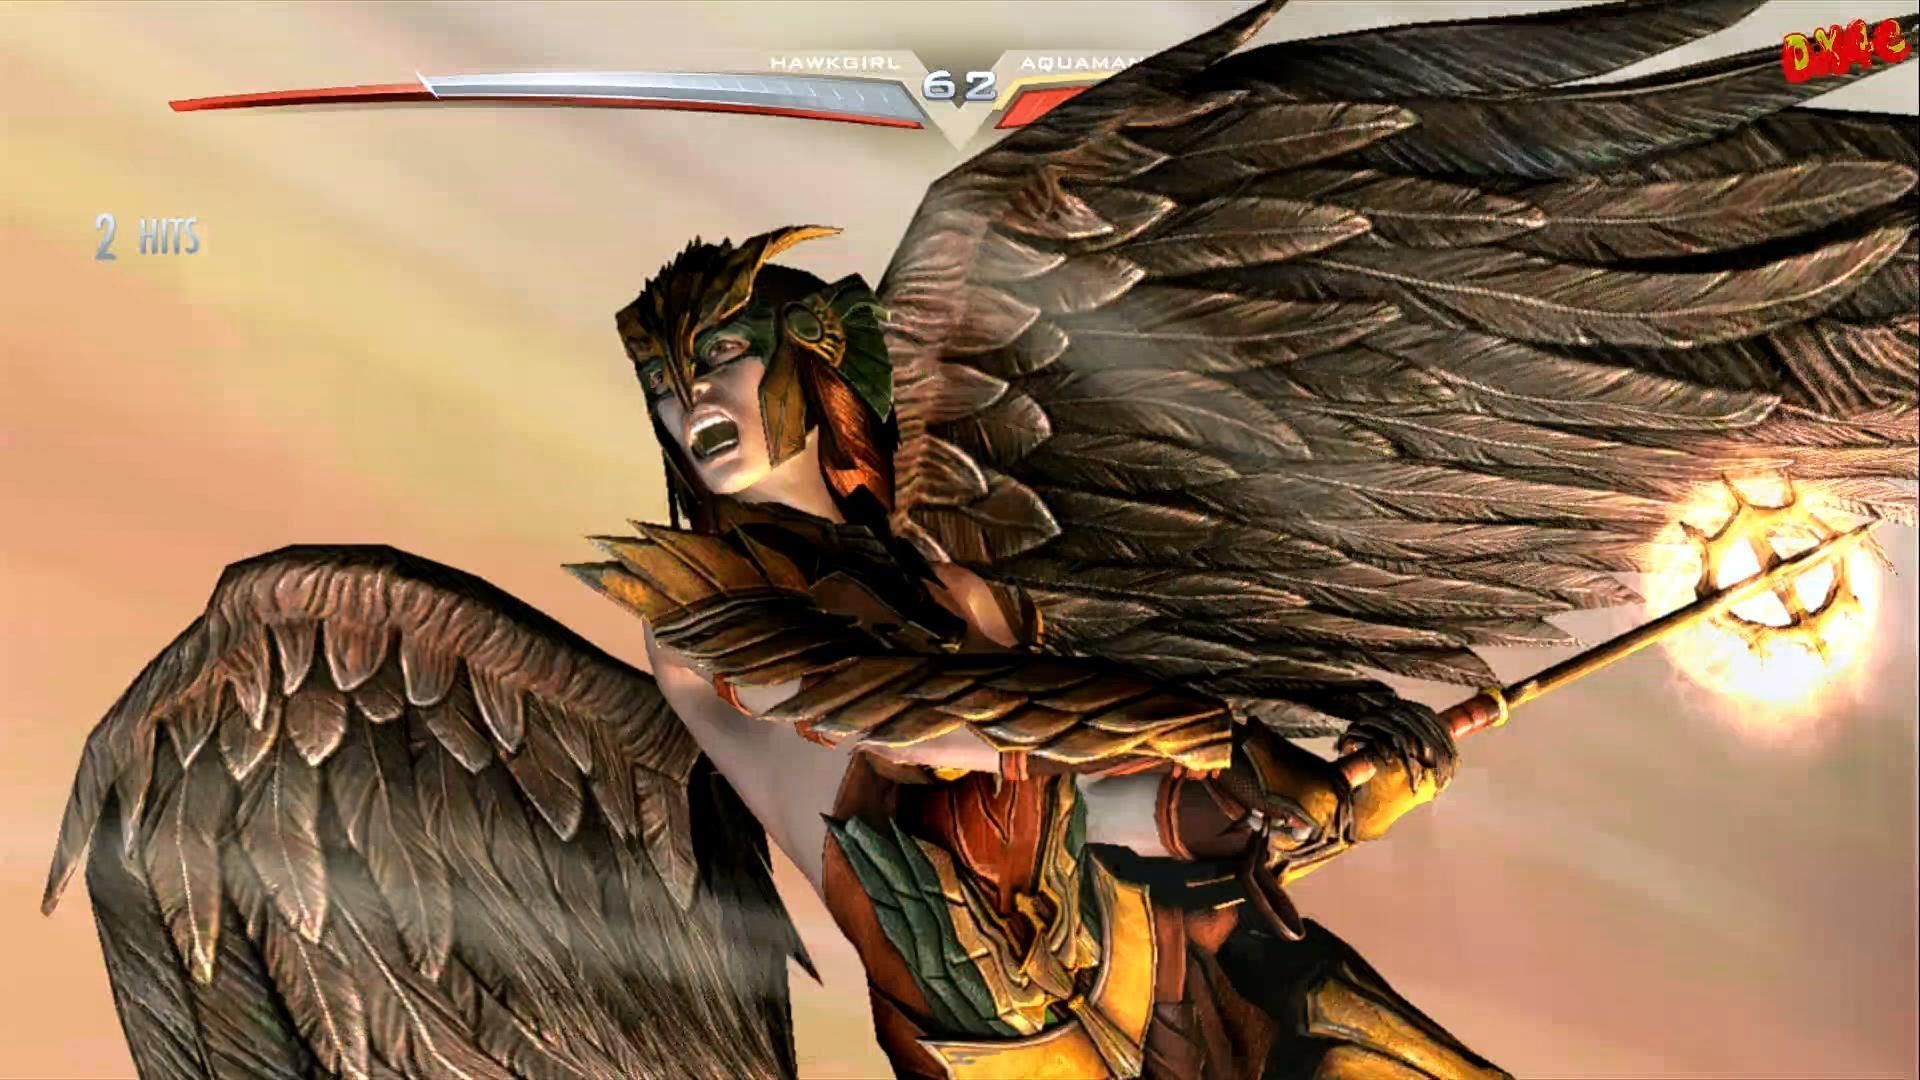 Injustice Gods Among Us Hawkgirl Arcade Ladder Playthrough , HD Wallpaper & Backgrounds